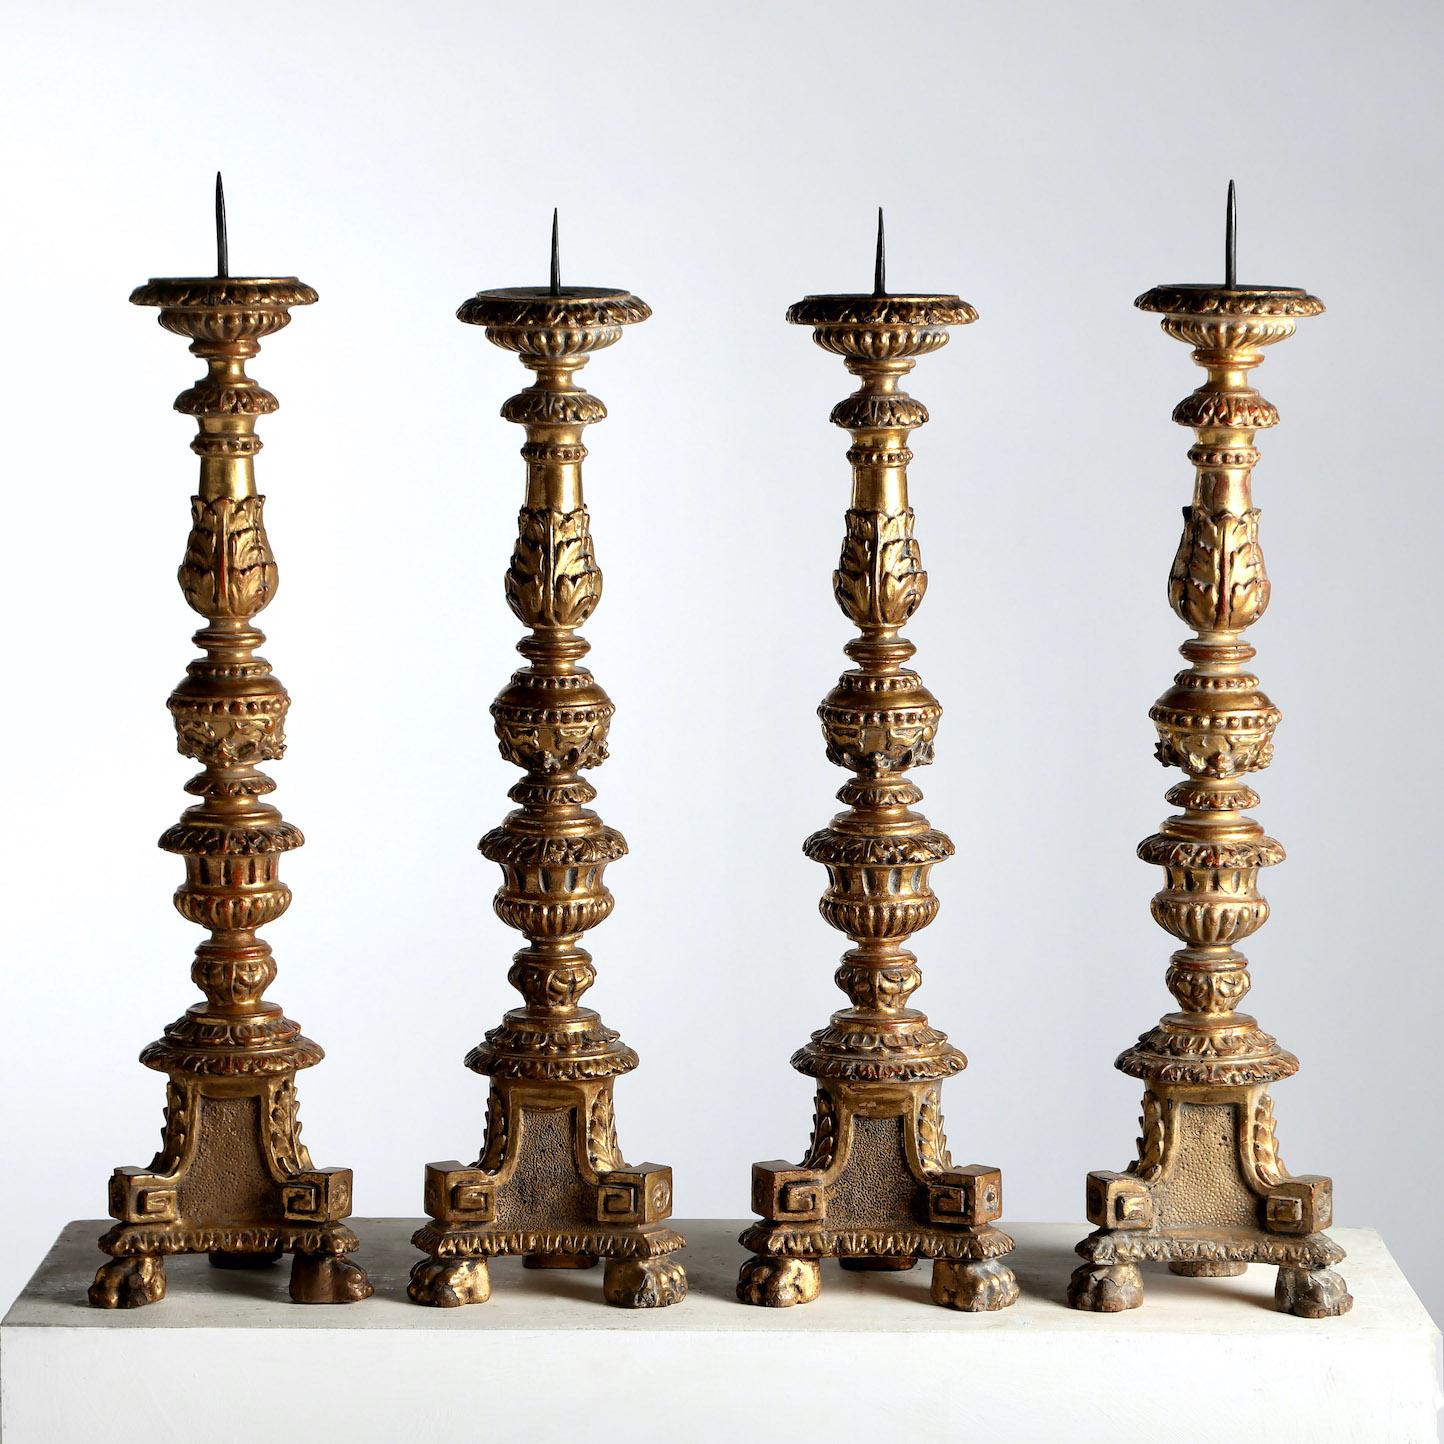 Giltwood A Set of Four 18th Century Candlesticks